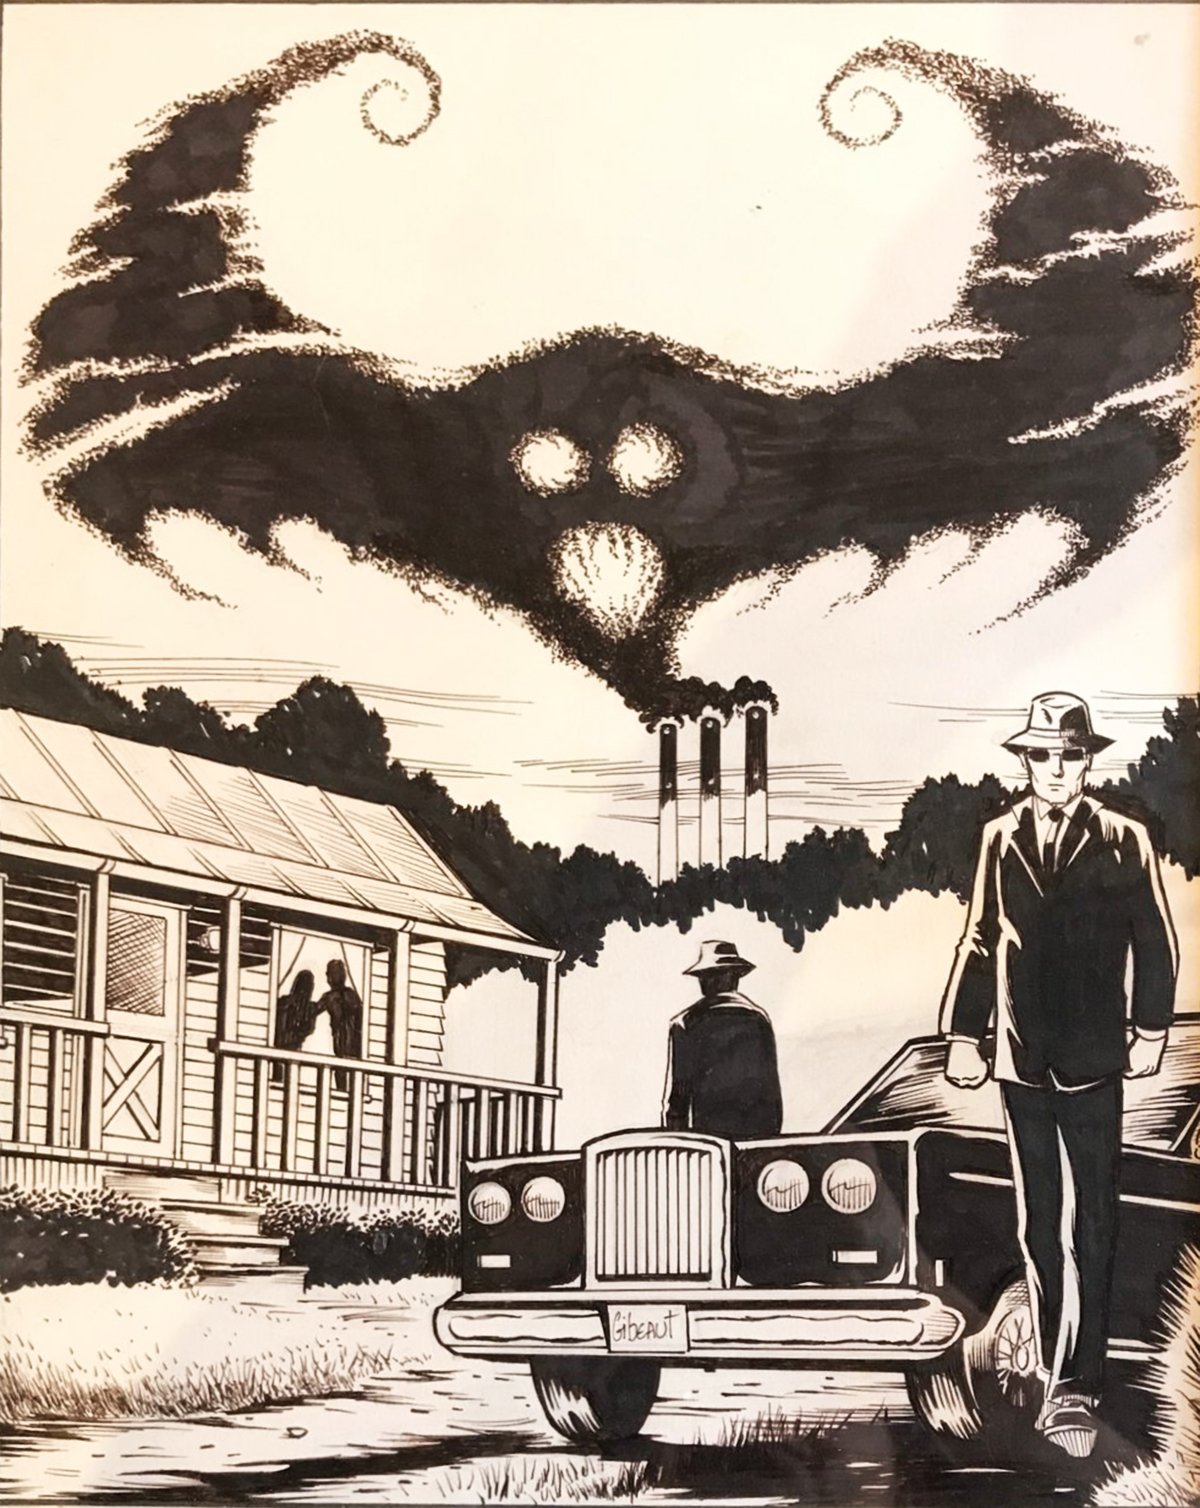 A black and white illustration of a man in a suit and hat standing next to a vintage car in front of a wooden house, with a giant moth-like creature looming in the sky. Signed by Braut.